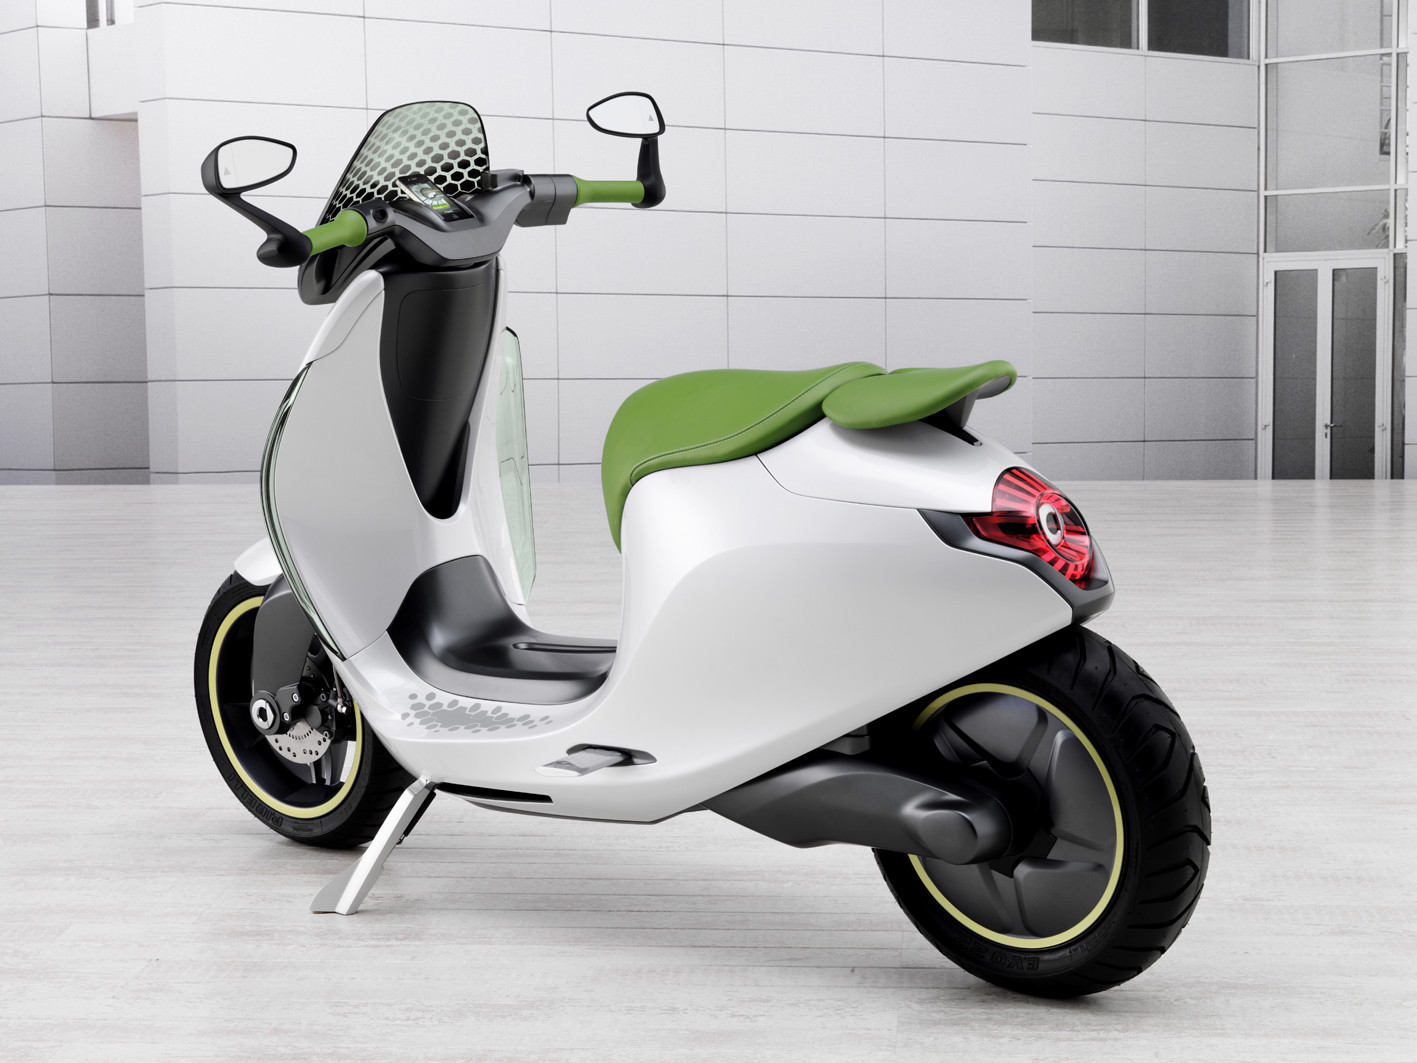 users_731_73141_smartescooter2-06f9.jpg